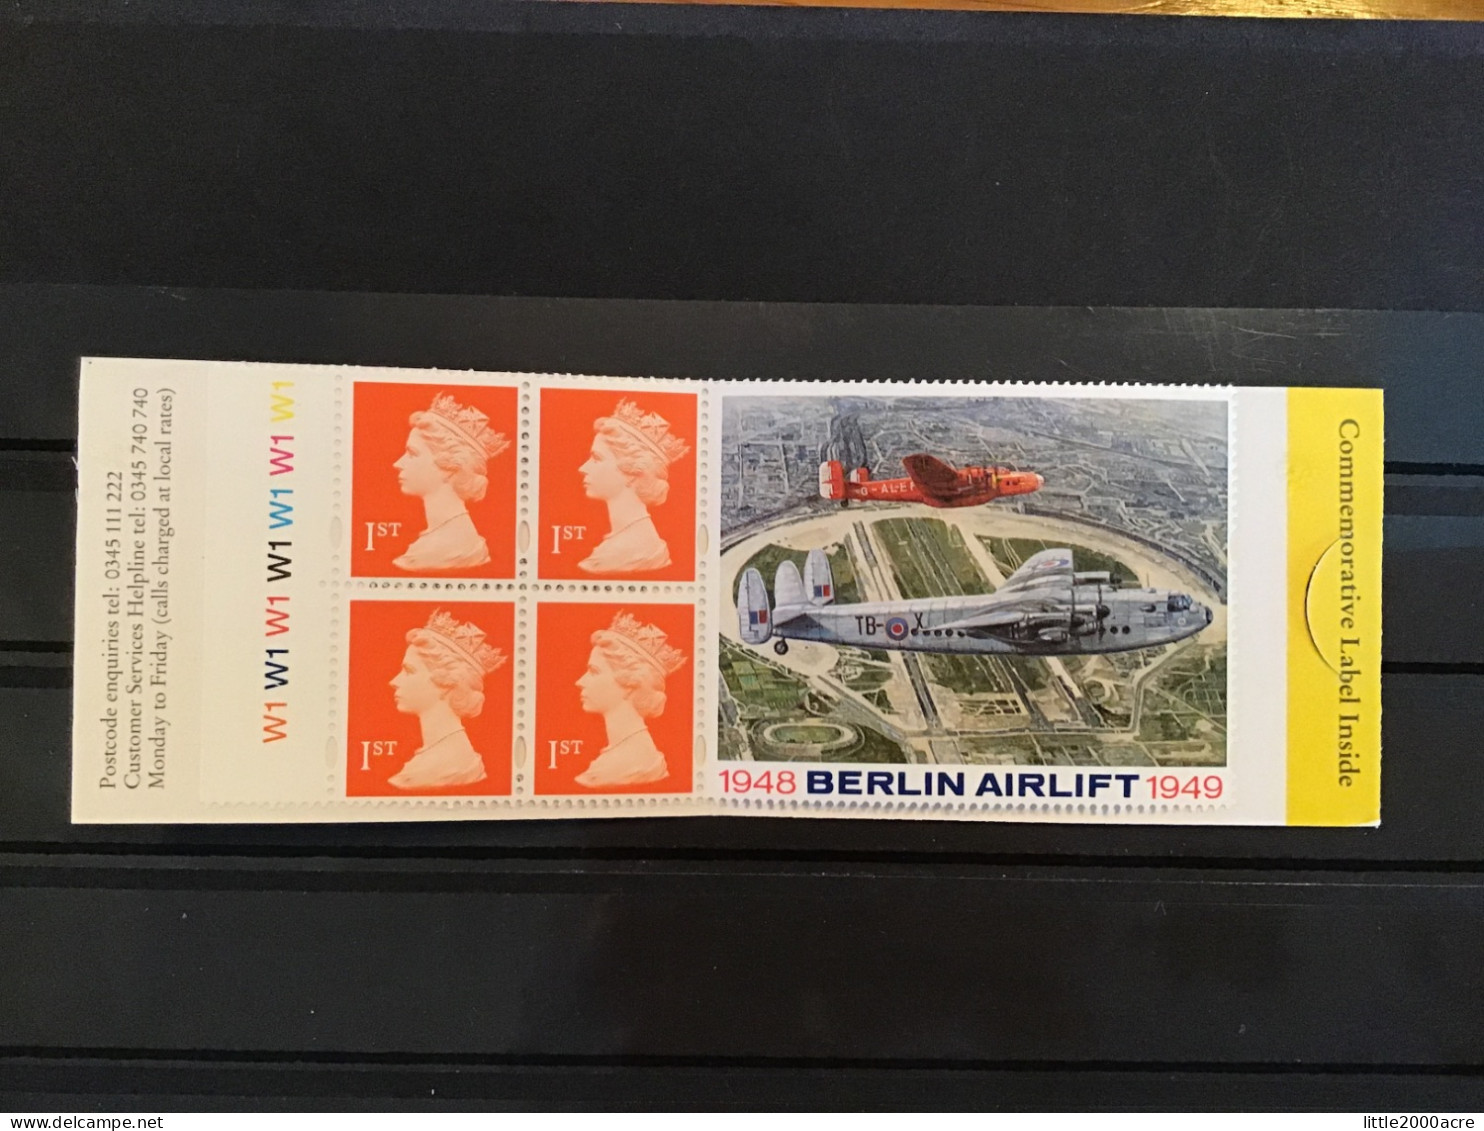 GB 1999 4 1st Class Stamps Barcode Booklet £1.04 Berlin Airlift MNH SG HB17 - Libretti